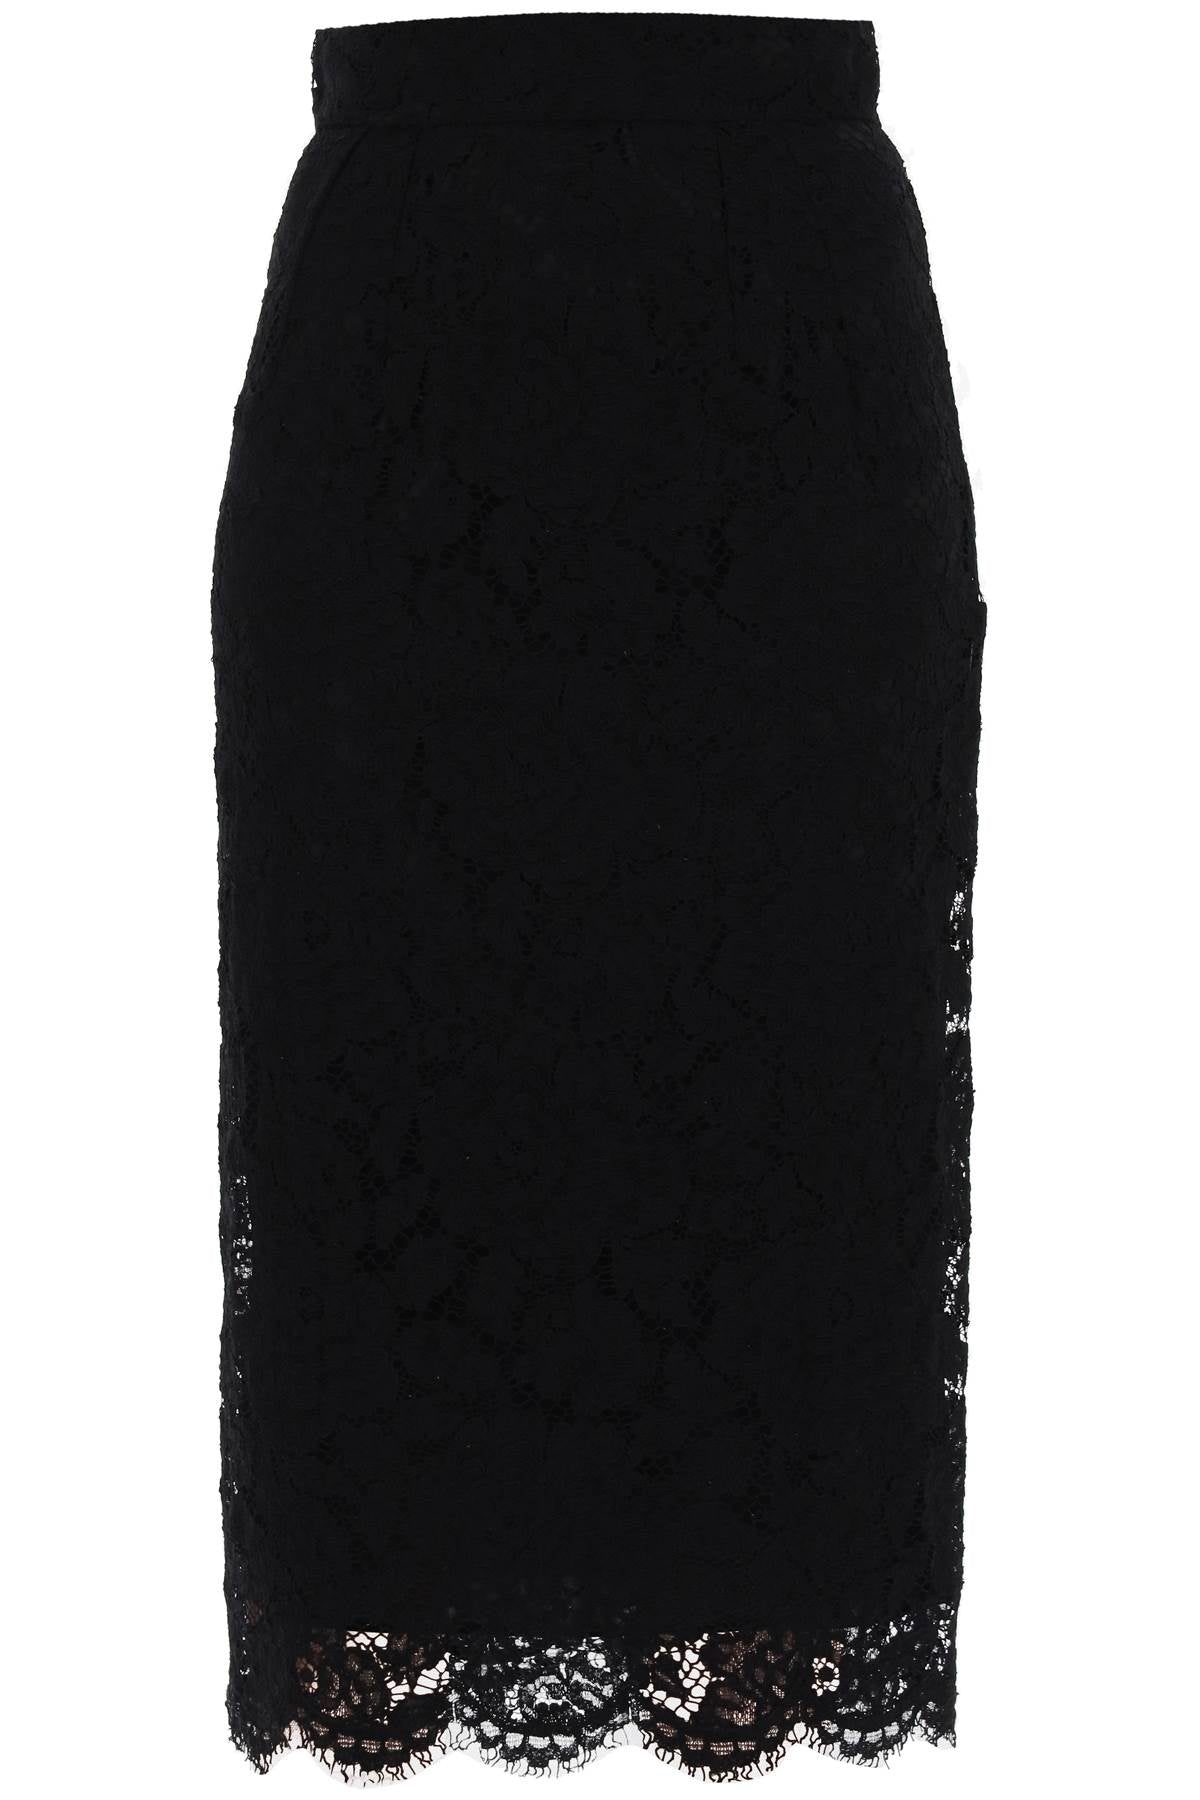 lace pencil skirt with tube silhouette